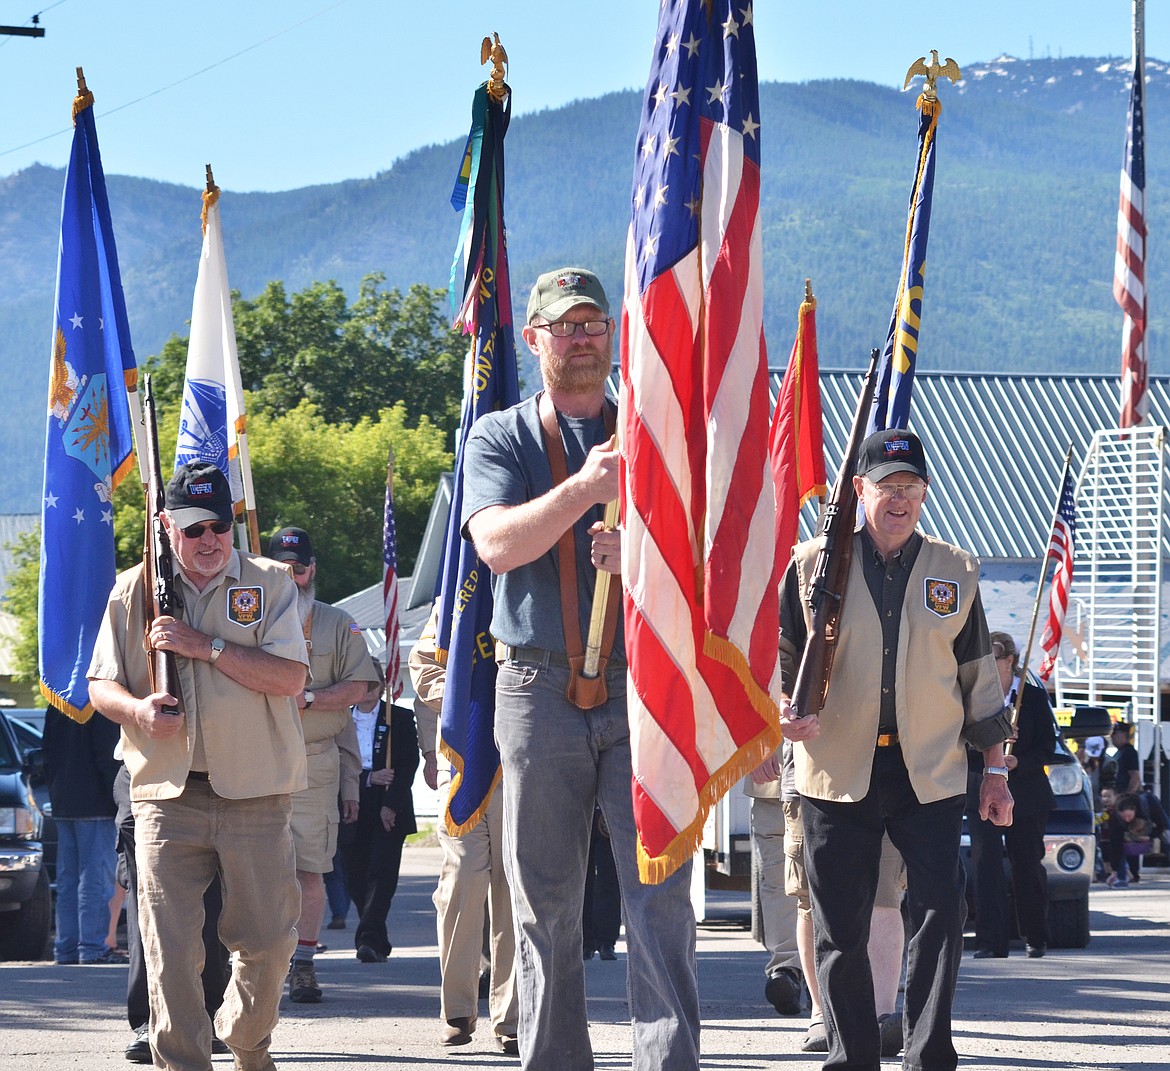 The Plains VFW Post 3596 Commander Doug Browning leads the way at the start of the Plains Day parade down Lynch Street in Plains. (Erin Jusseaume photos/ Clark Fork Valley Press)